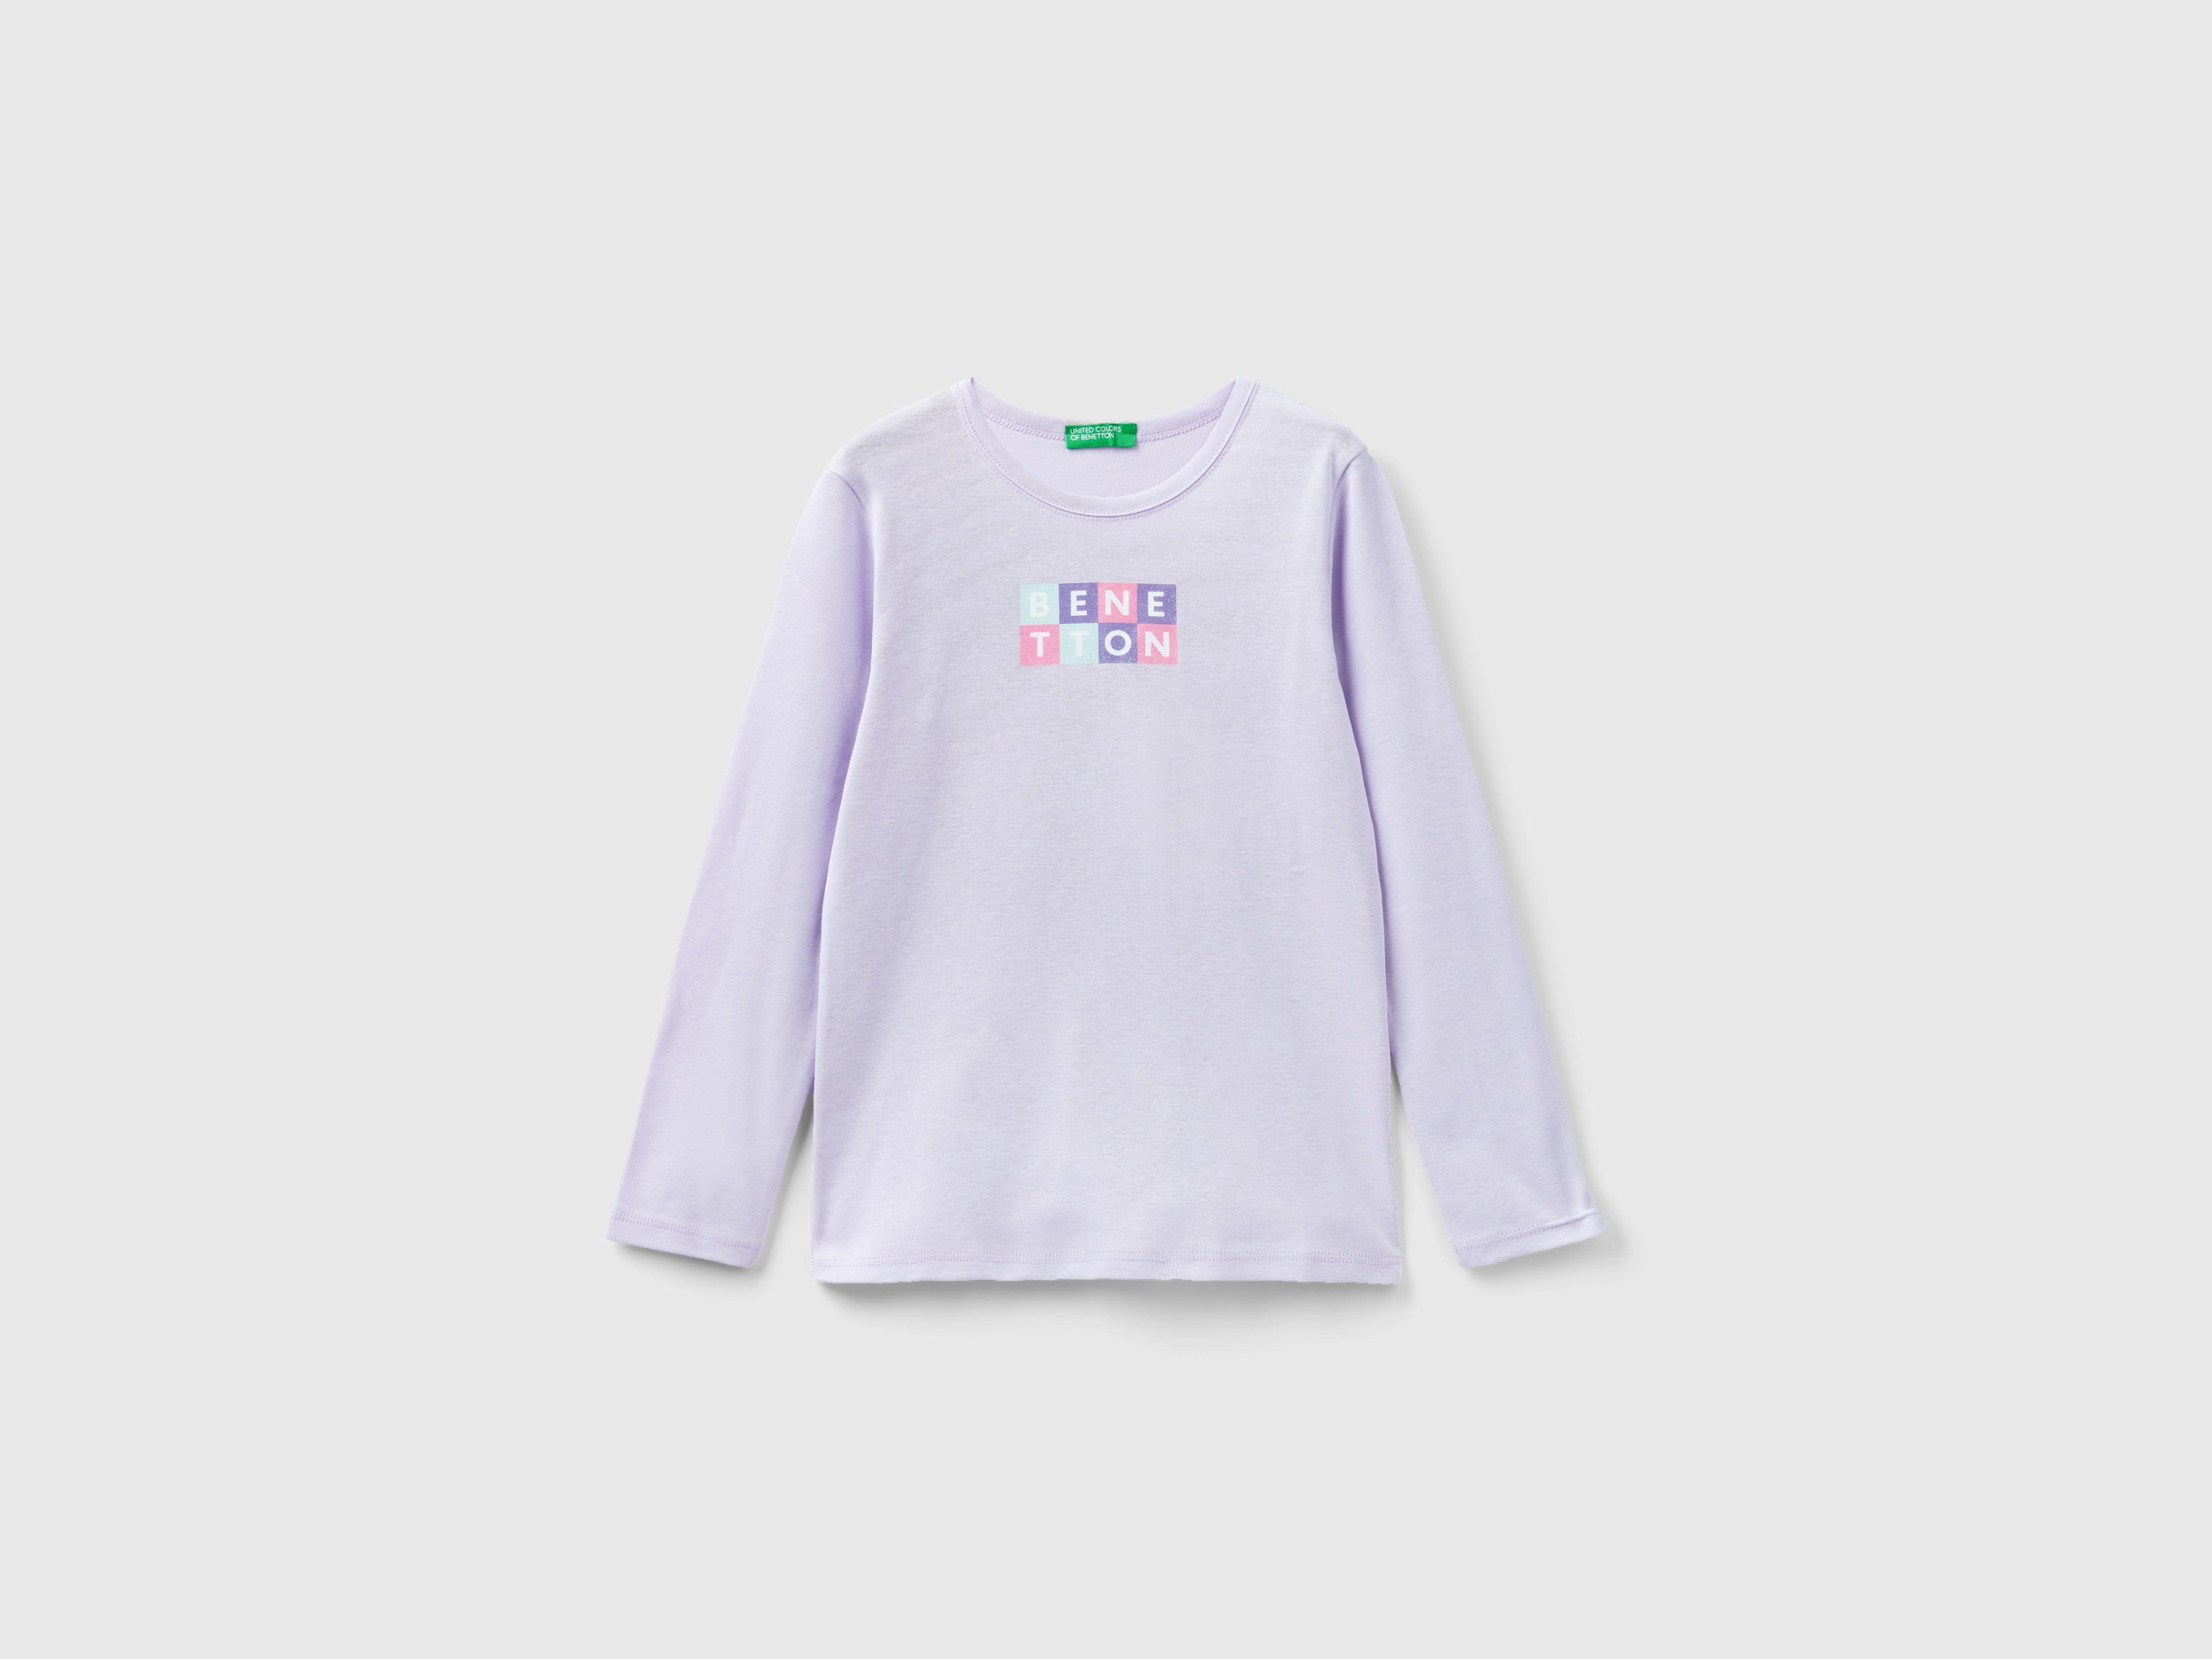 Image of Benetton, Long Sleeve T-shirt With Glitter Print, size 2XL, Lilac, Kids